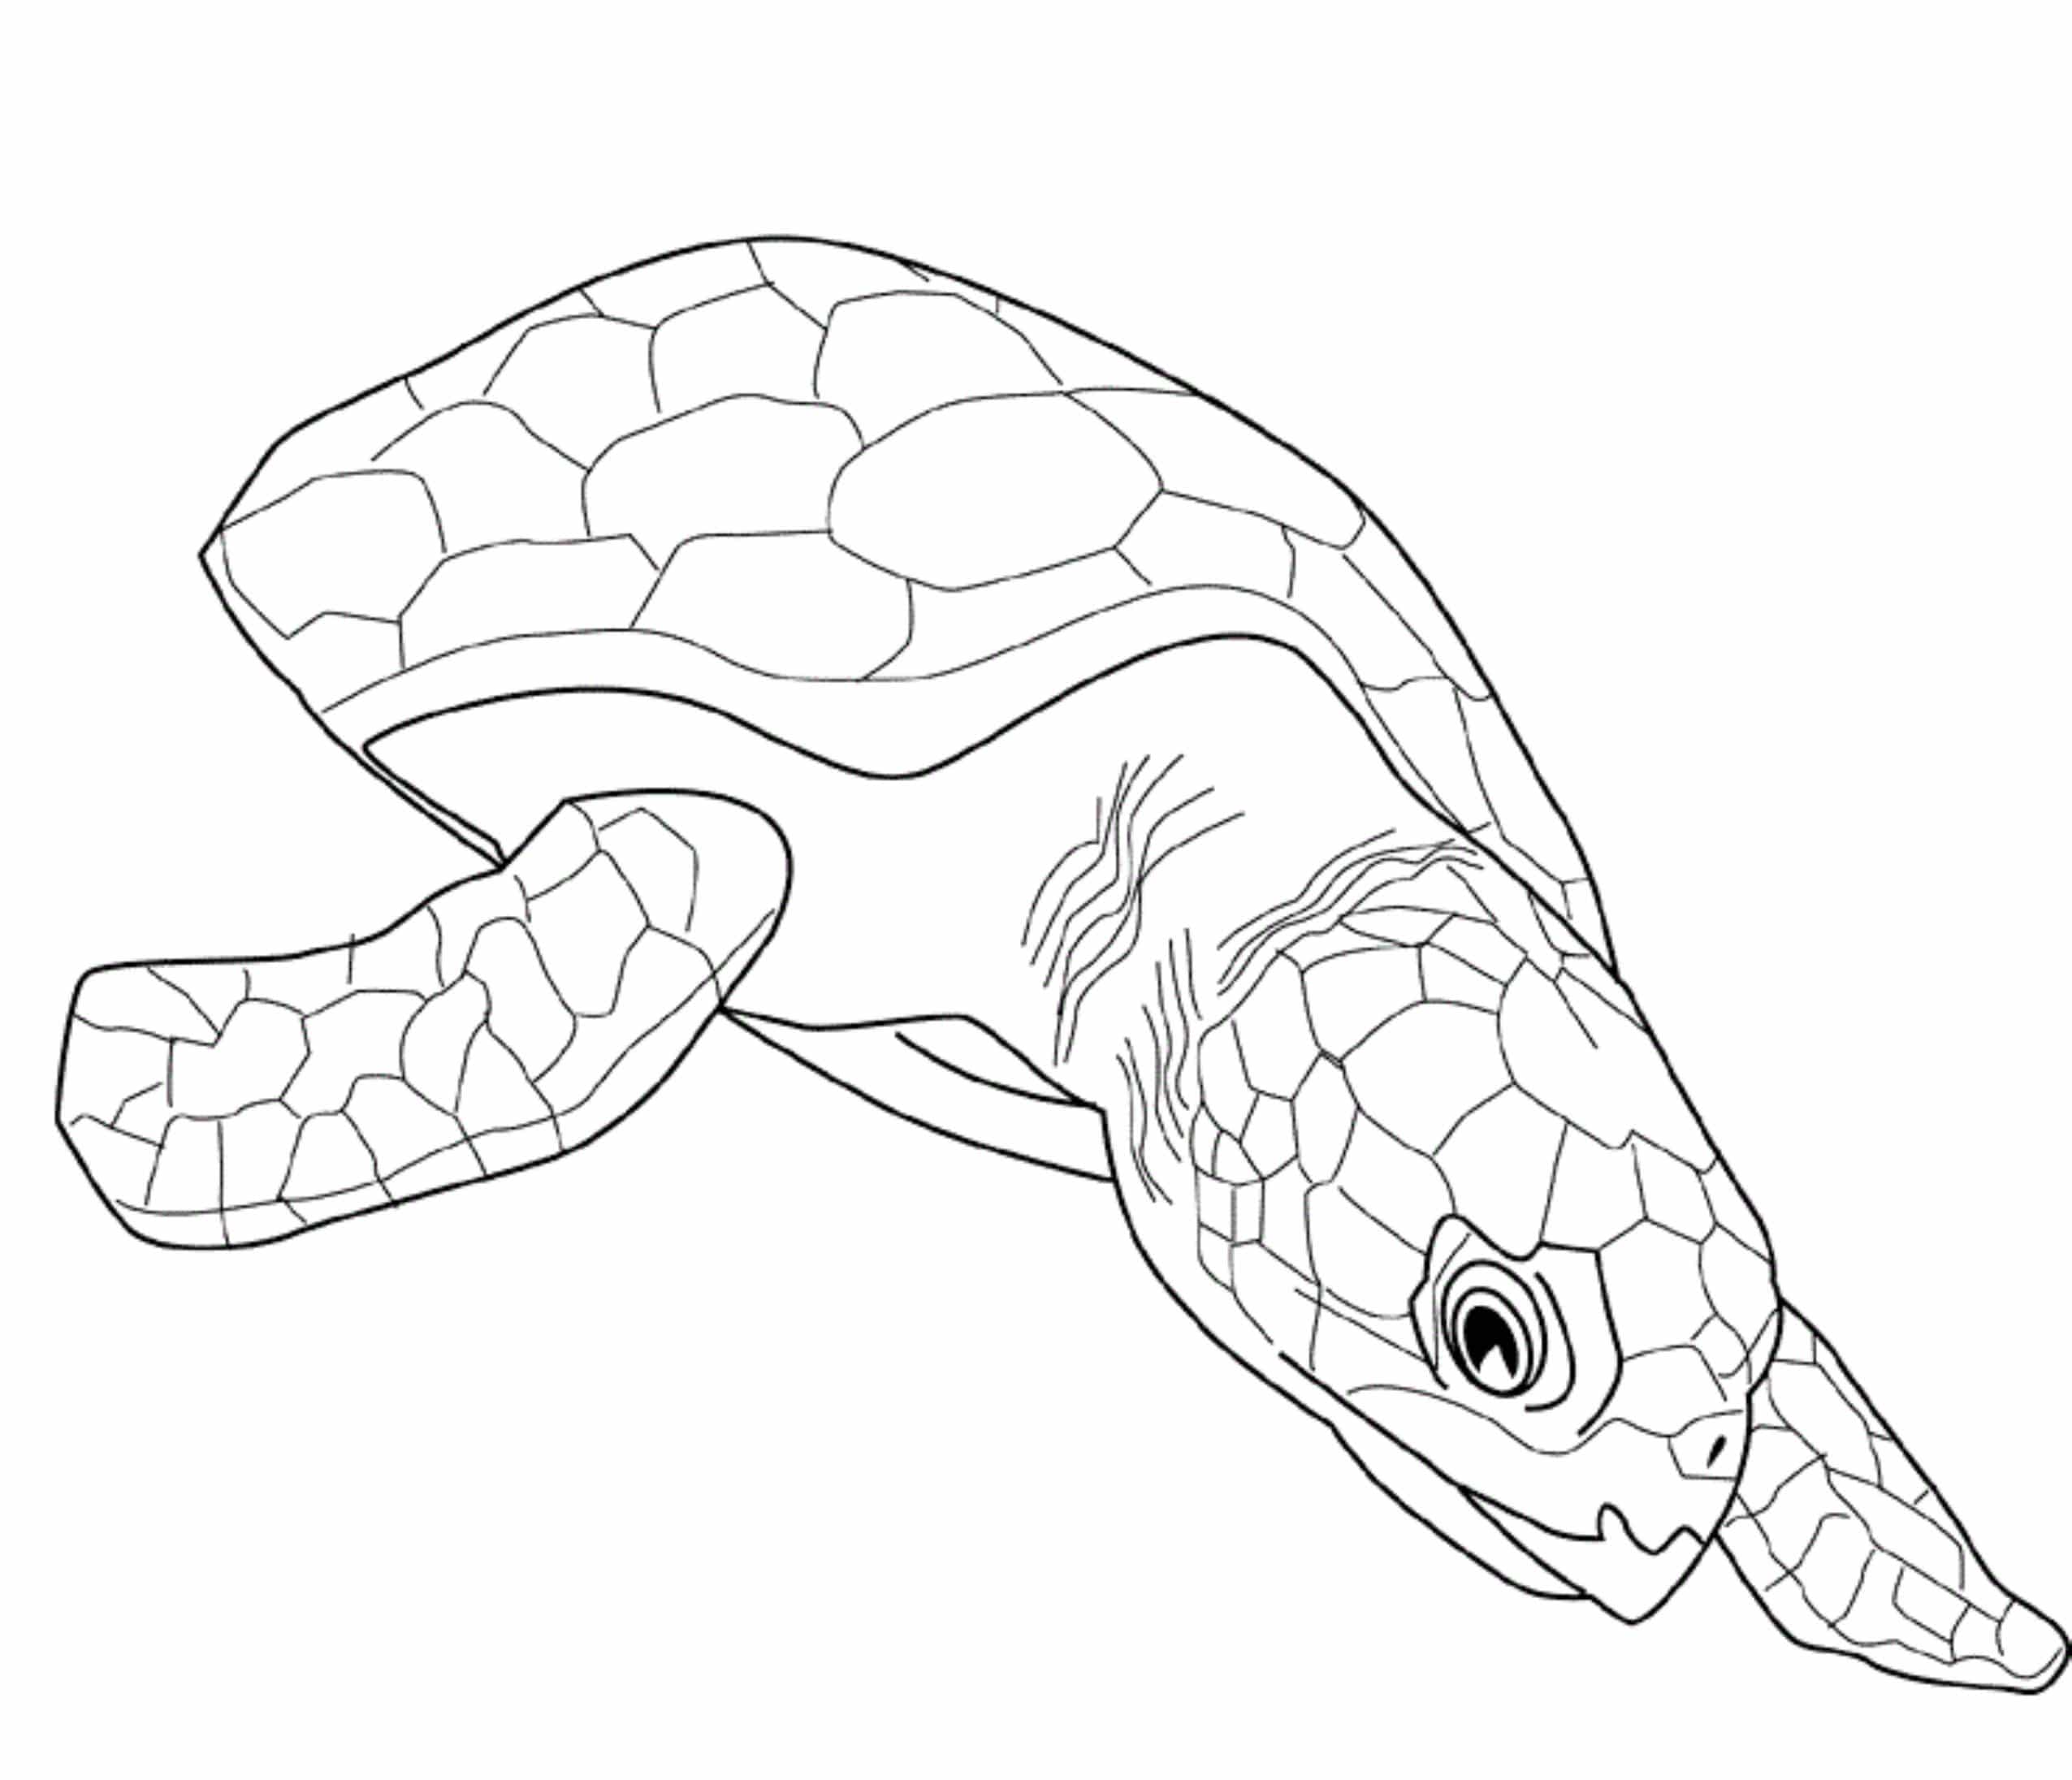 Print & Download Turtle Coloring Pages as the